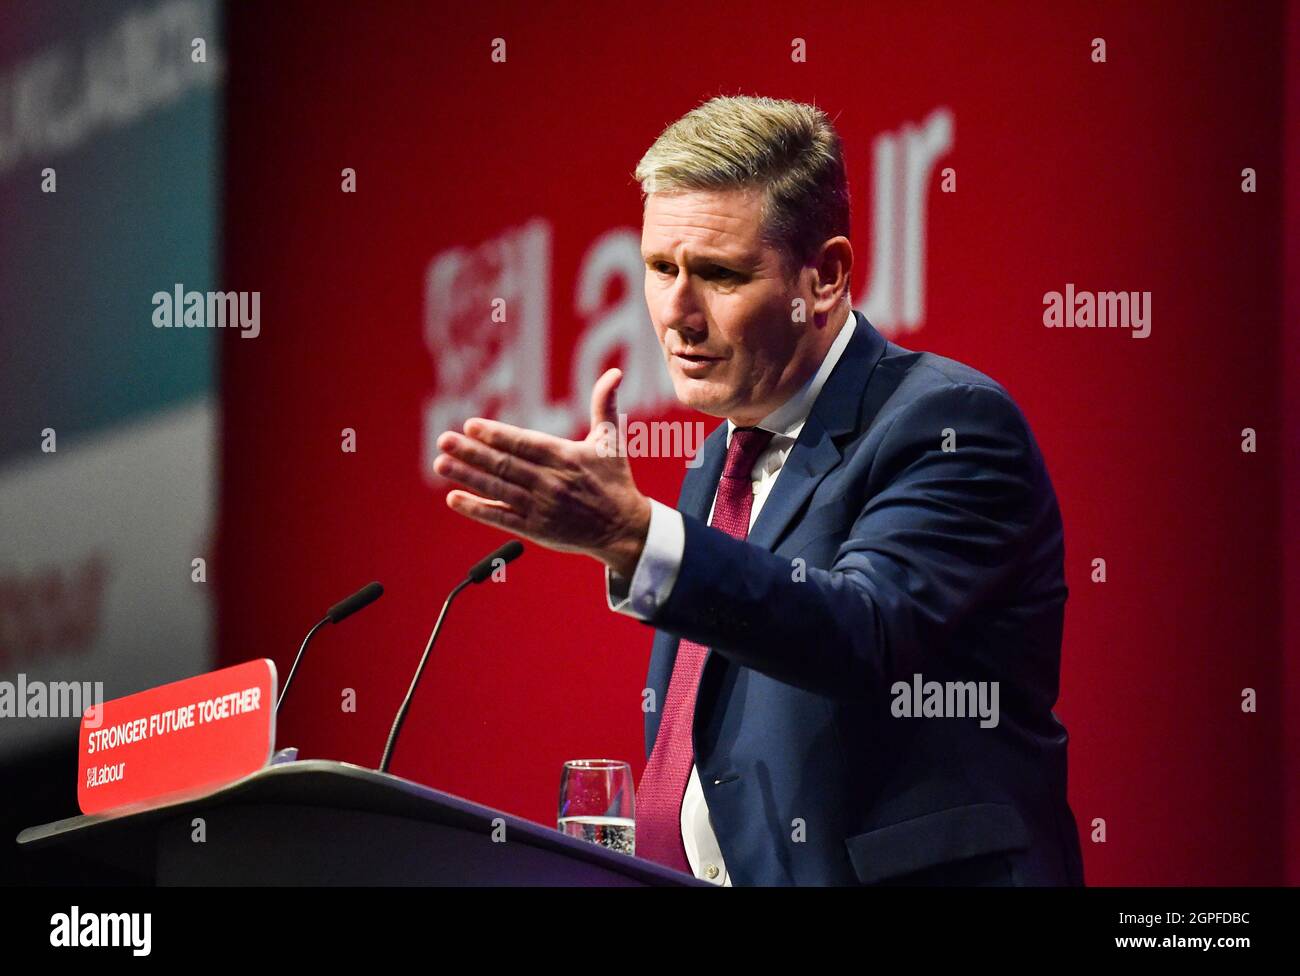 Brighton UK 29th September 2021 - Sir Keir Starmer giving his speech to the Labour Party Conference today at the Brighton Centre  : Credit Simon Dack / Alamy Live News Stock Photo